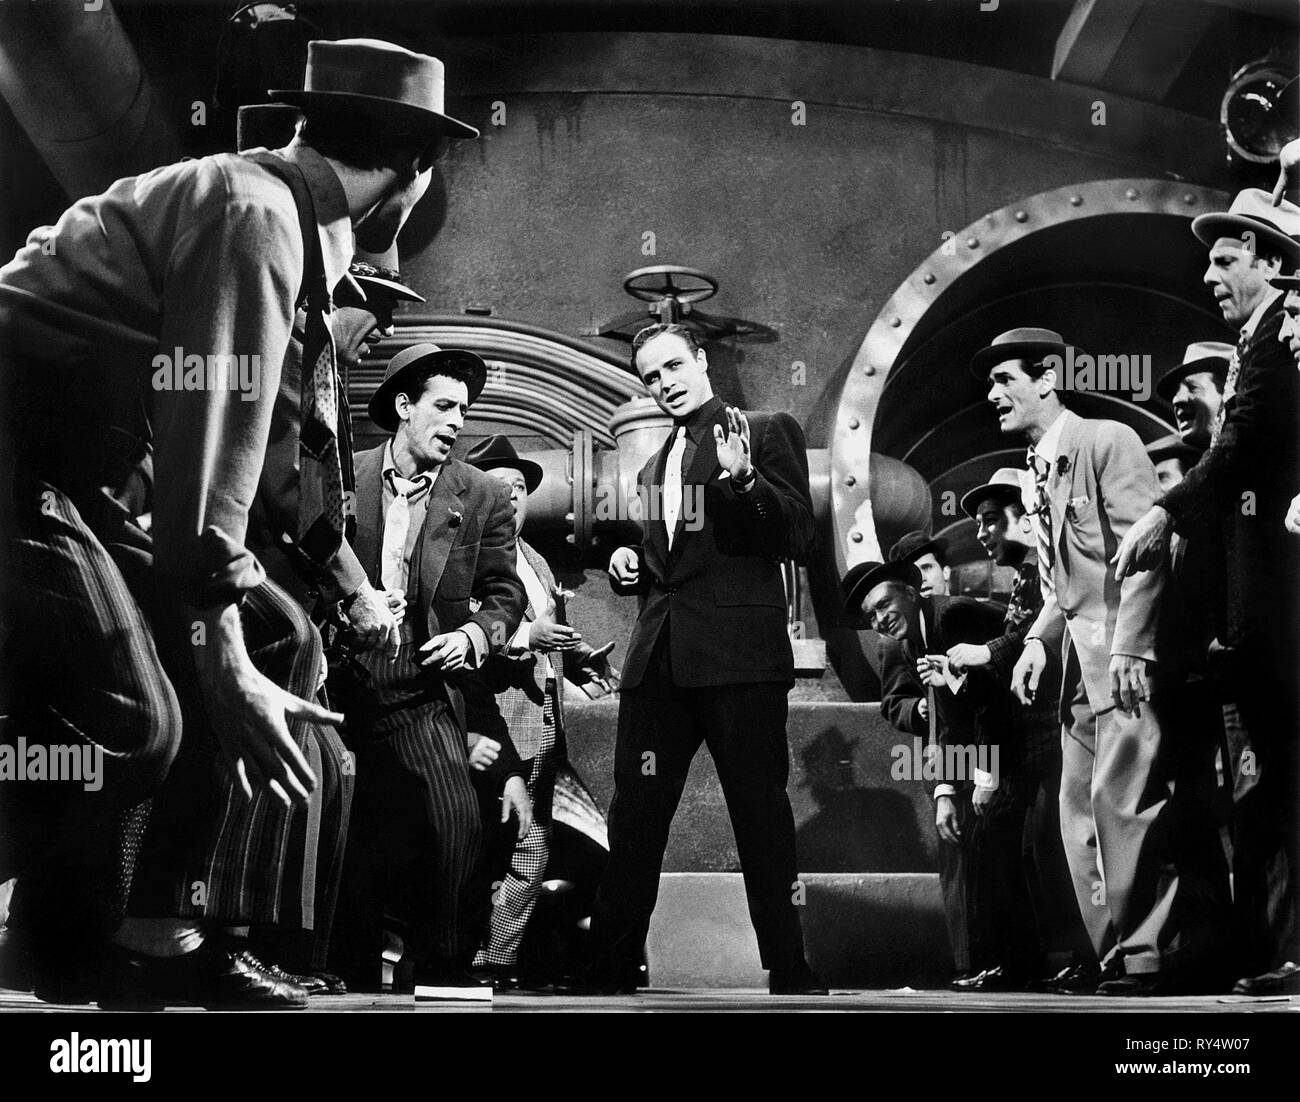 MARLON BRANDO, GUYS AND DOLLS, 1955 Banque D'Images